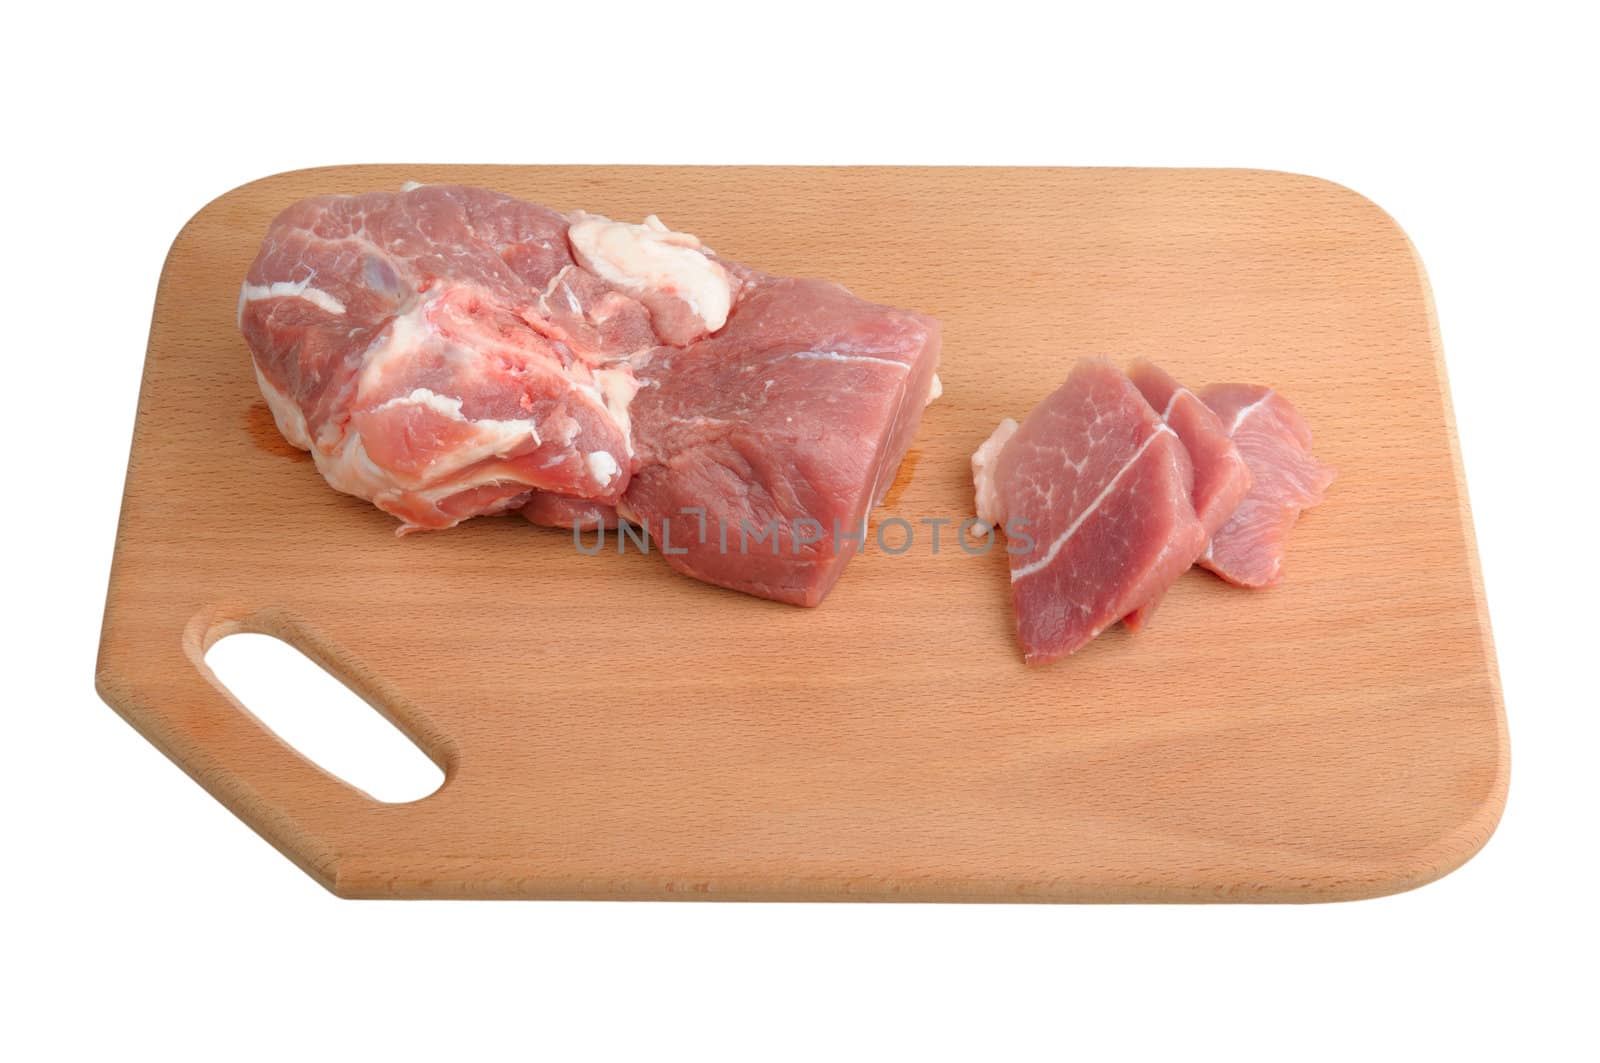 meat on a wooden board isolated on white background